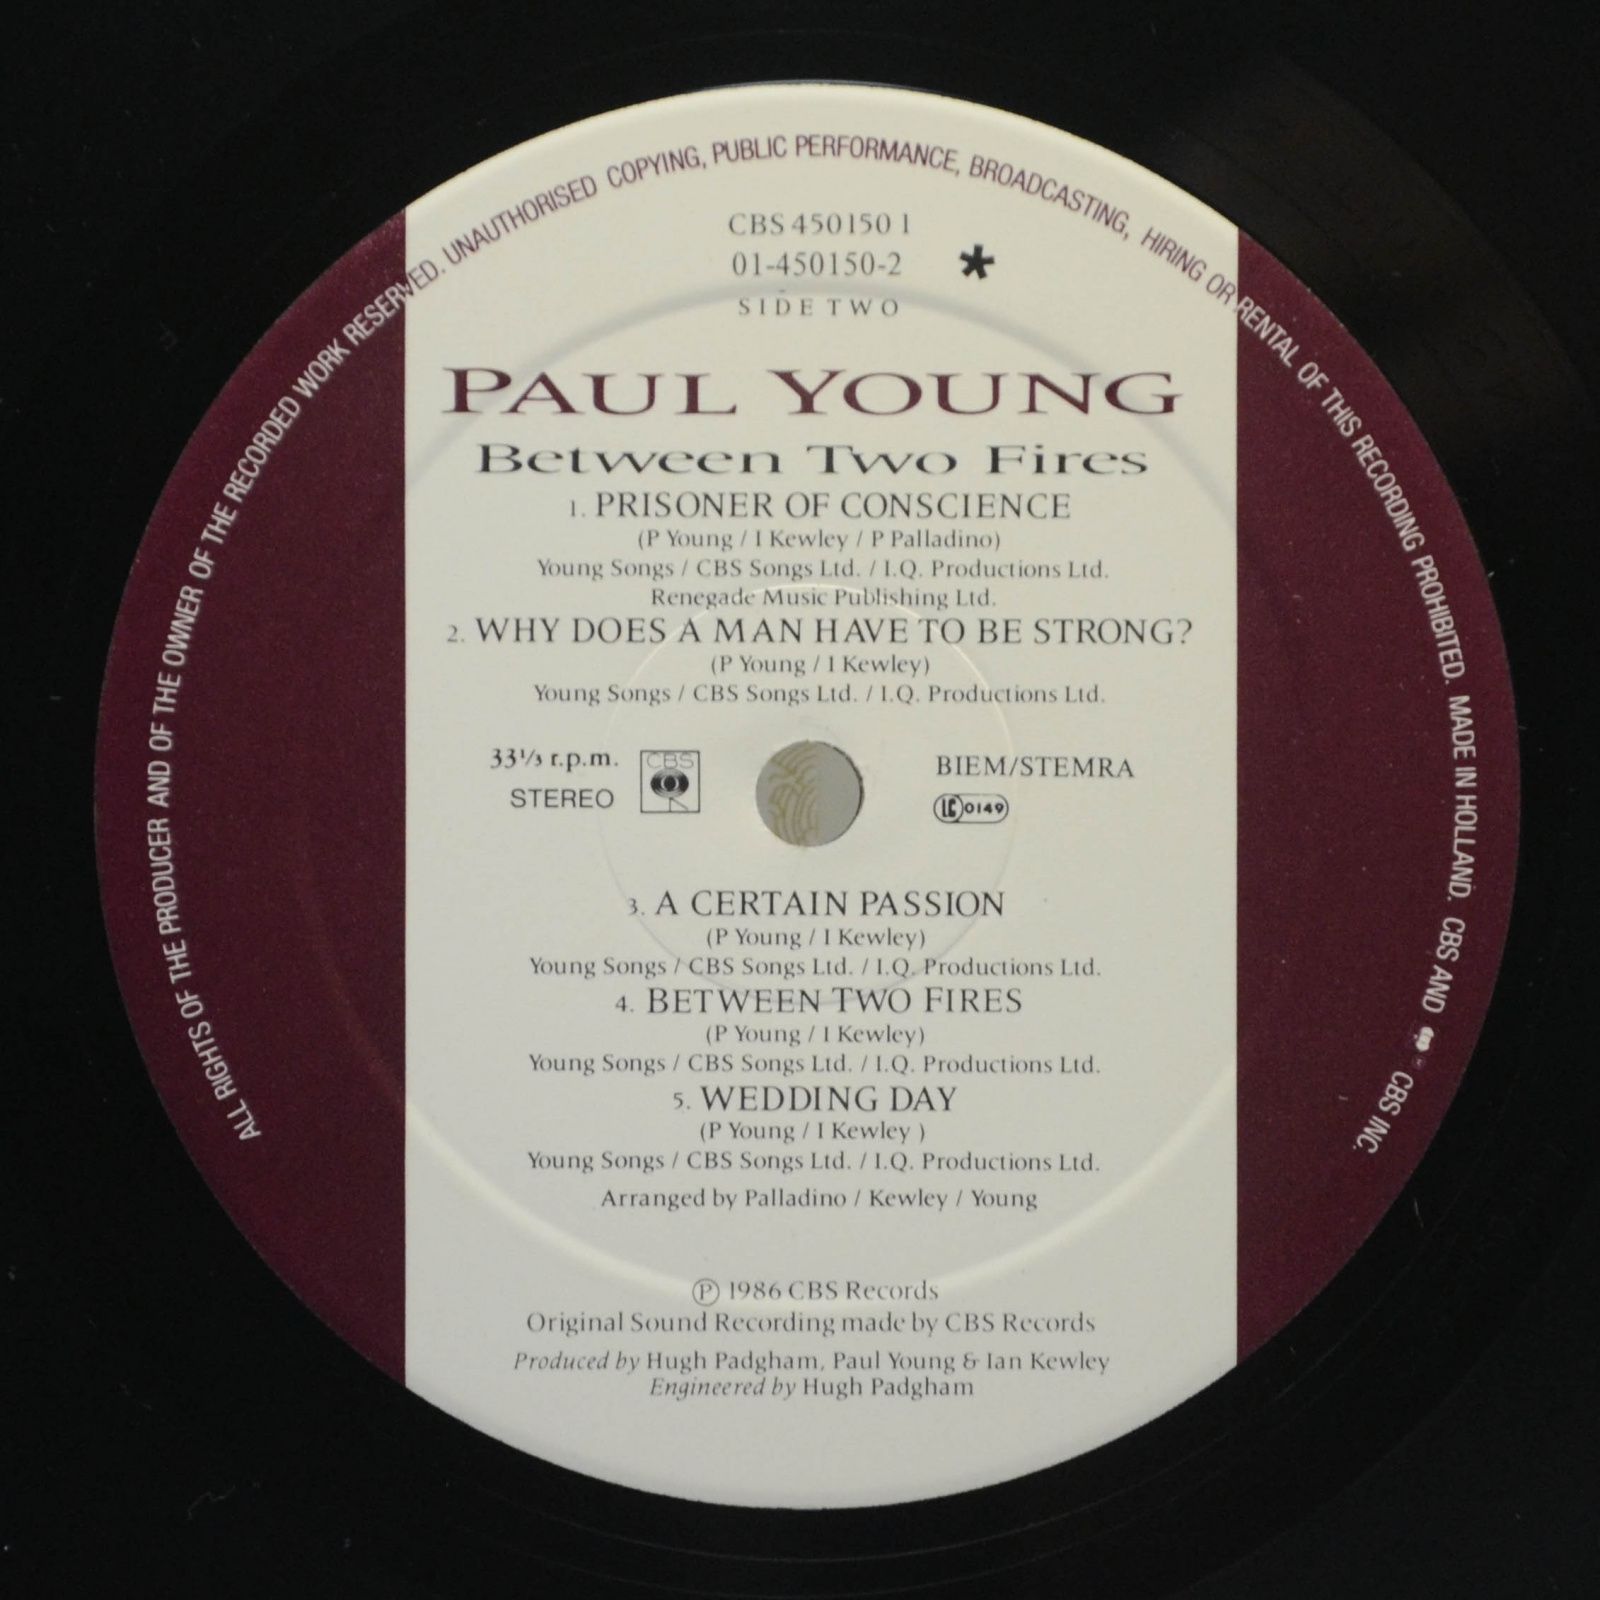 Paul Young — Between Two Fires, 1986